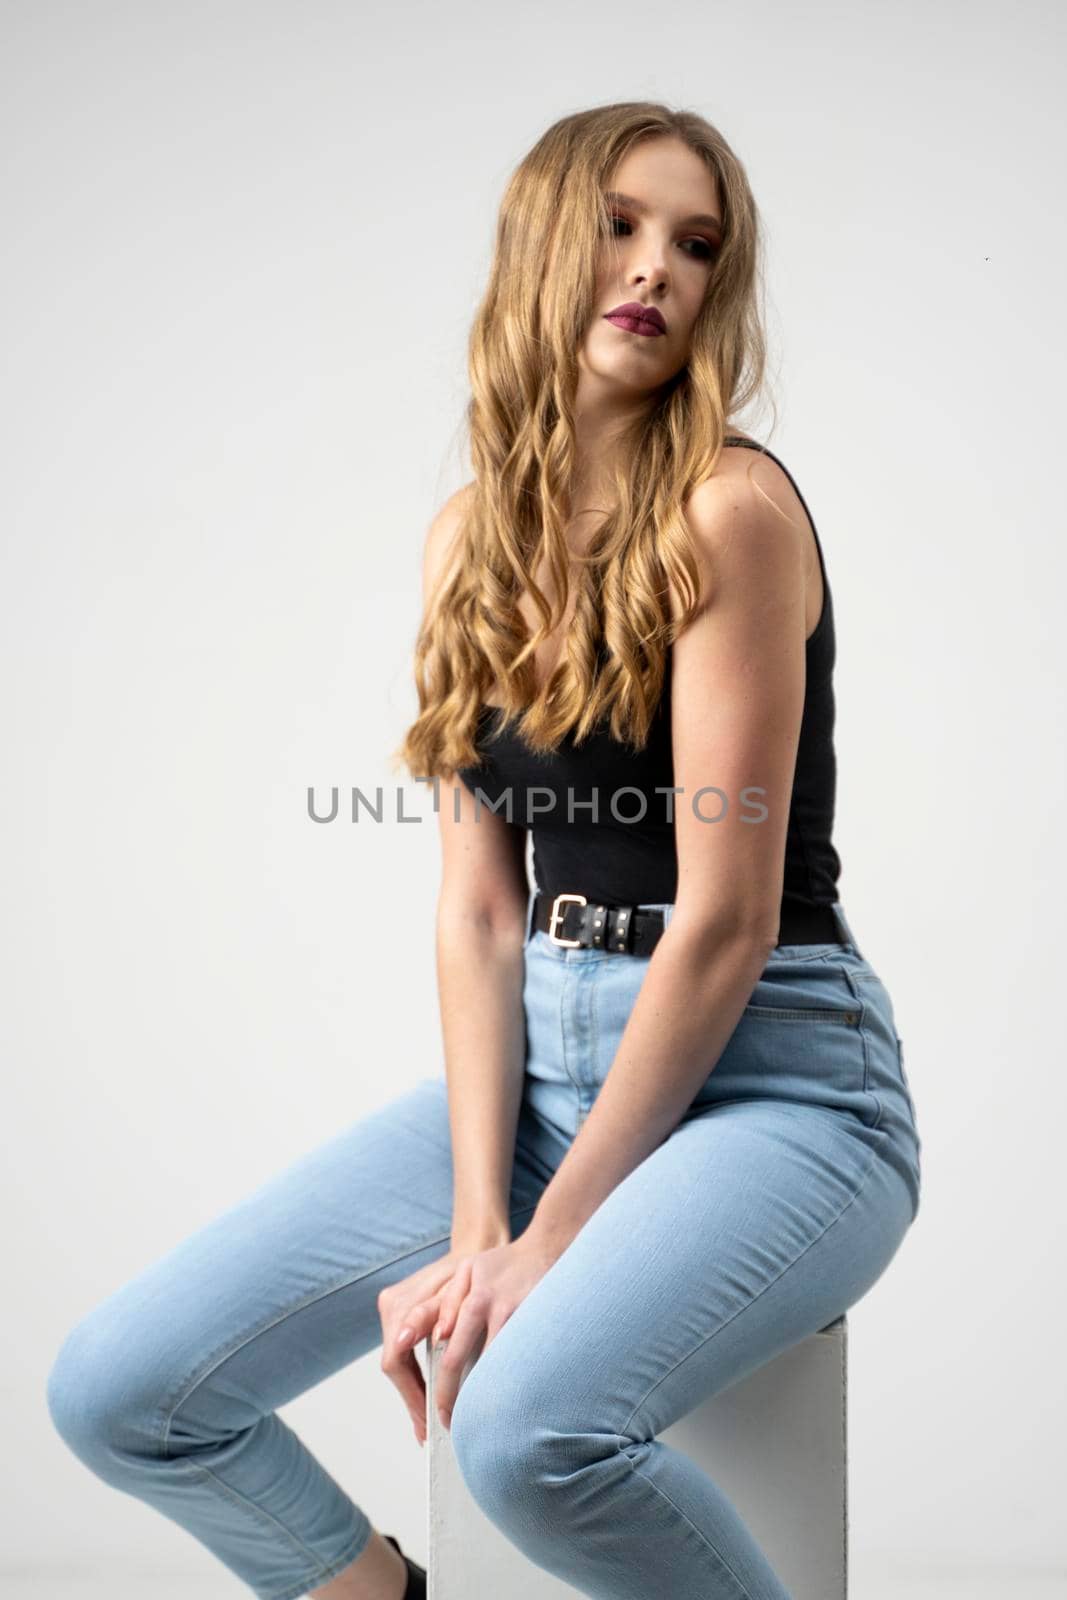 Beautiful young woman portrait in a black t-shirt and blue jeans. Studio shot, isolated on gray background. by vovsht